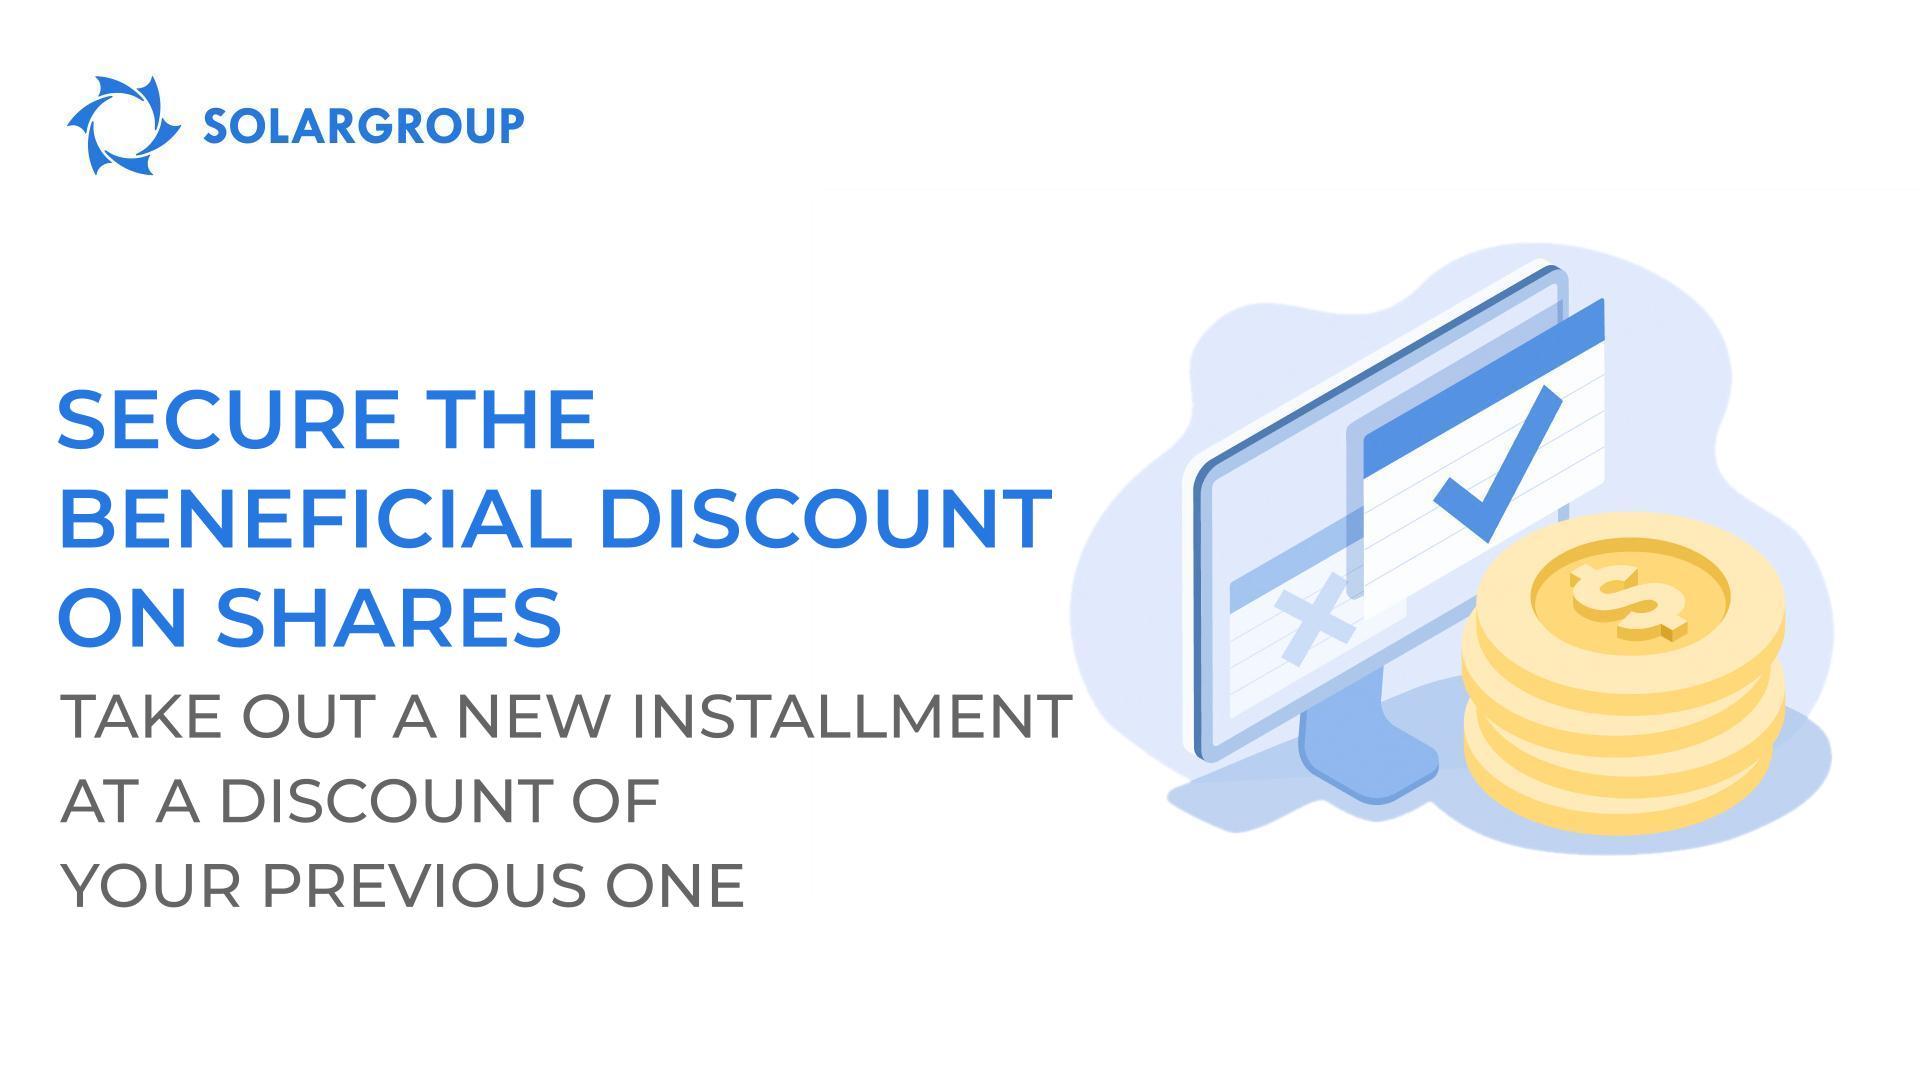 Secure the beneficial discount on shares: take out a new installment at a discount of your previous one